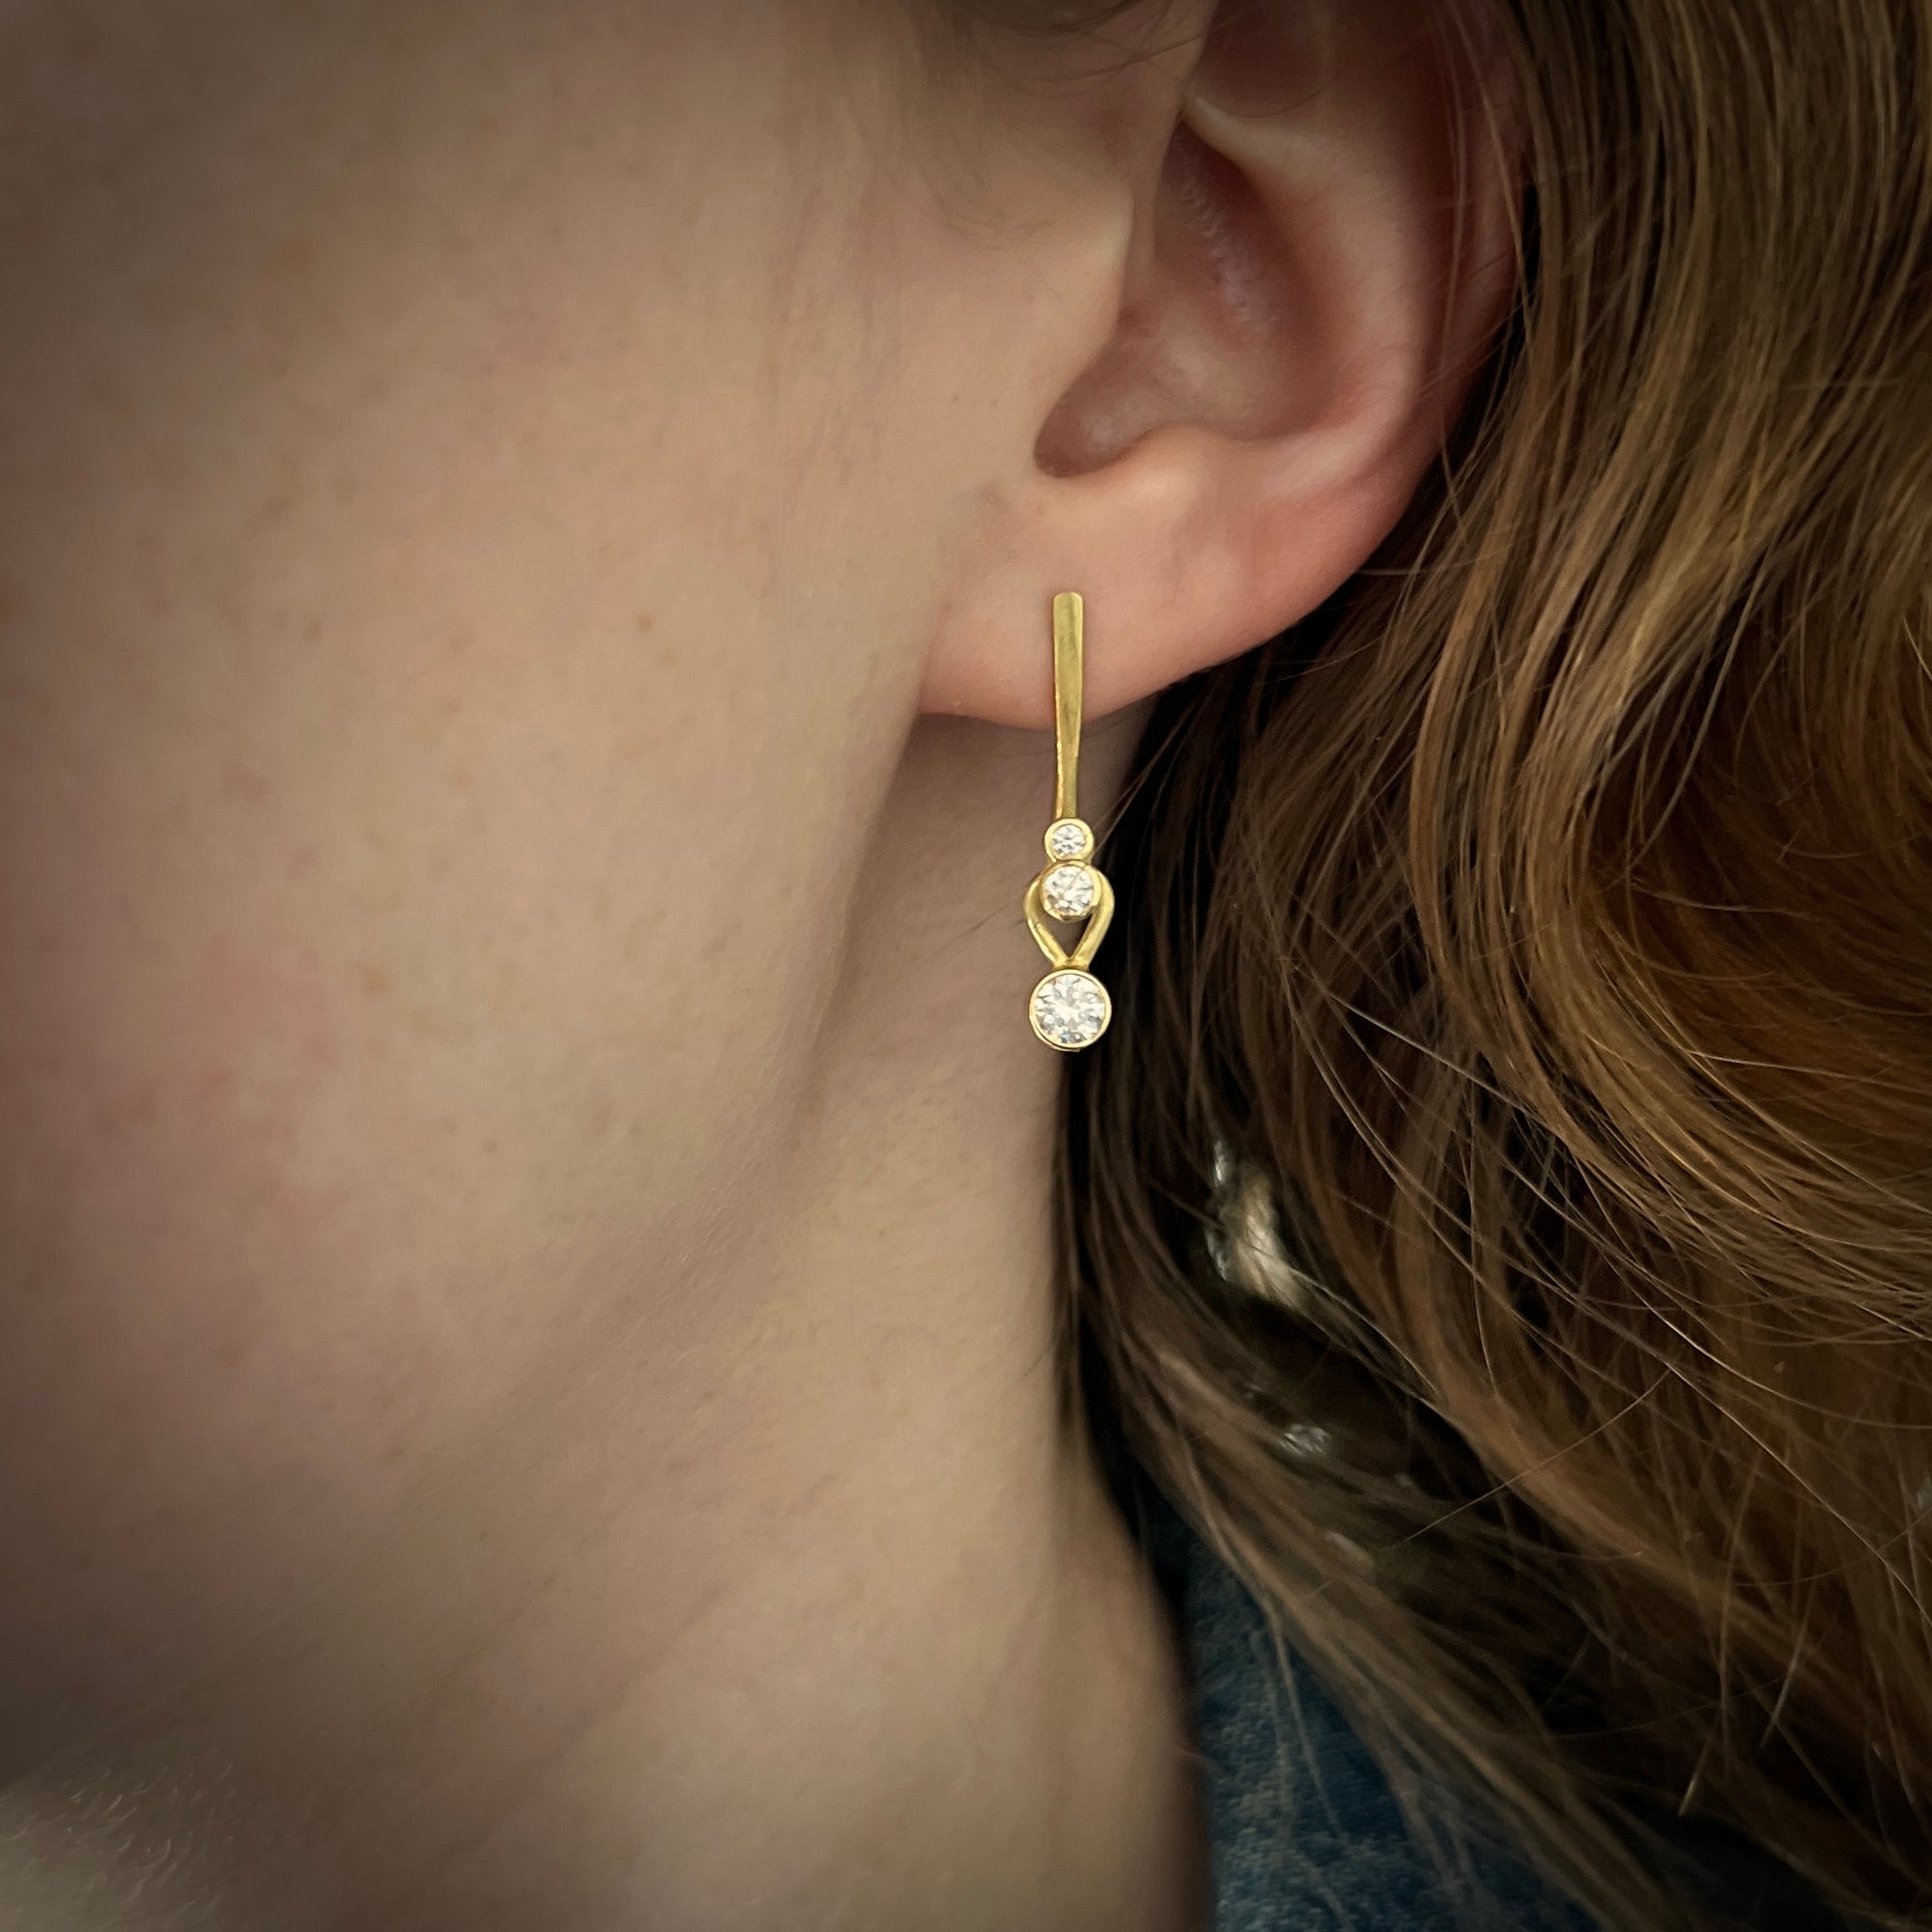 Driftwood Earrings in 18K gold with stacked diamond drops